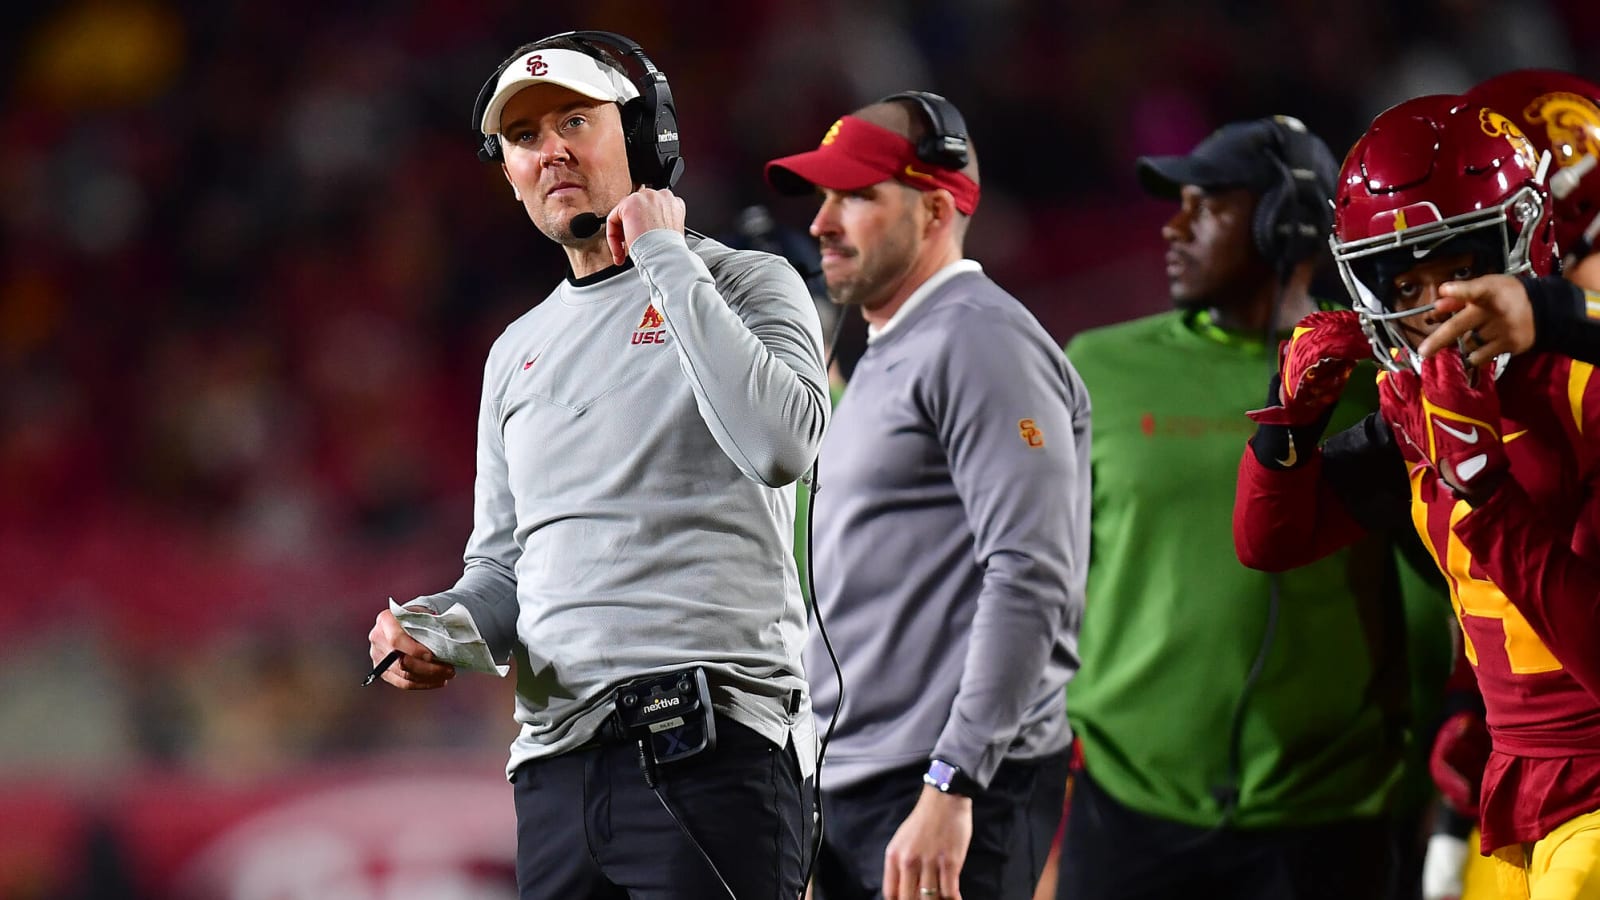 Video suggests Lincoln Riley lied about timeout against UCLA